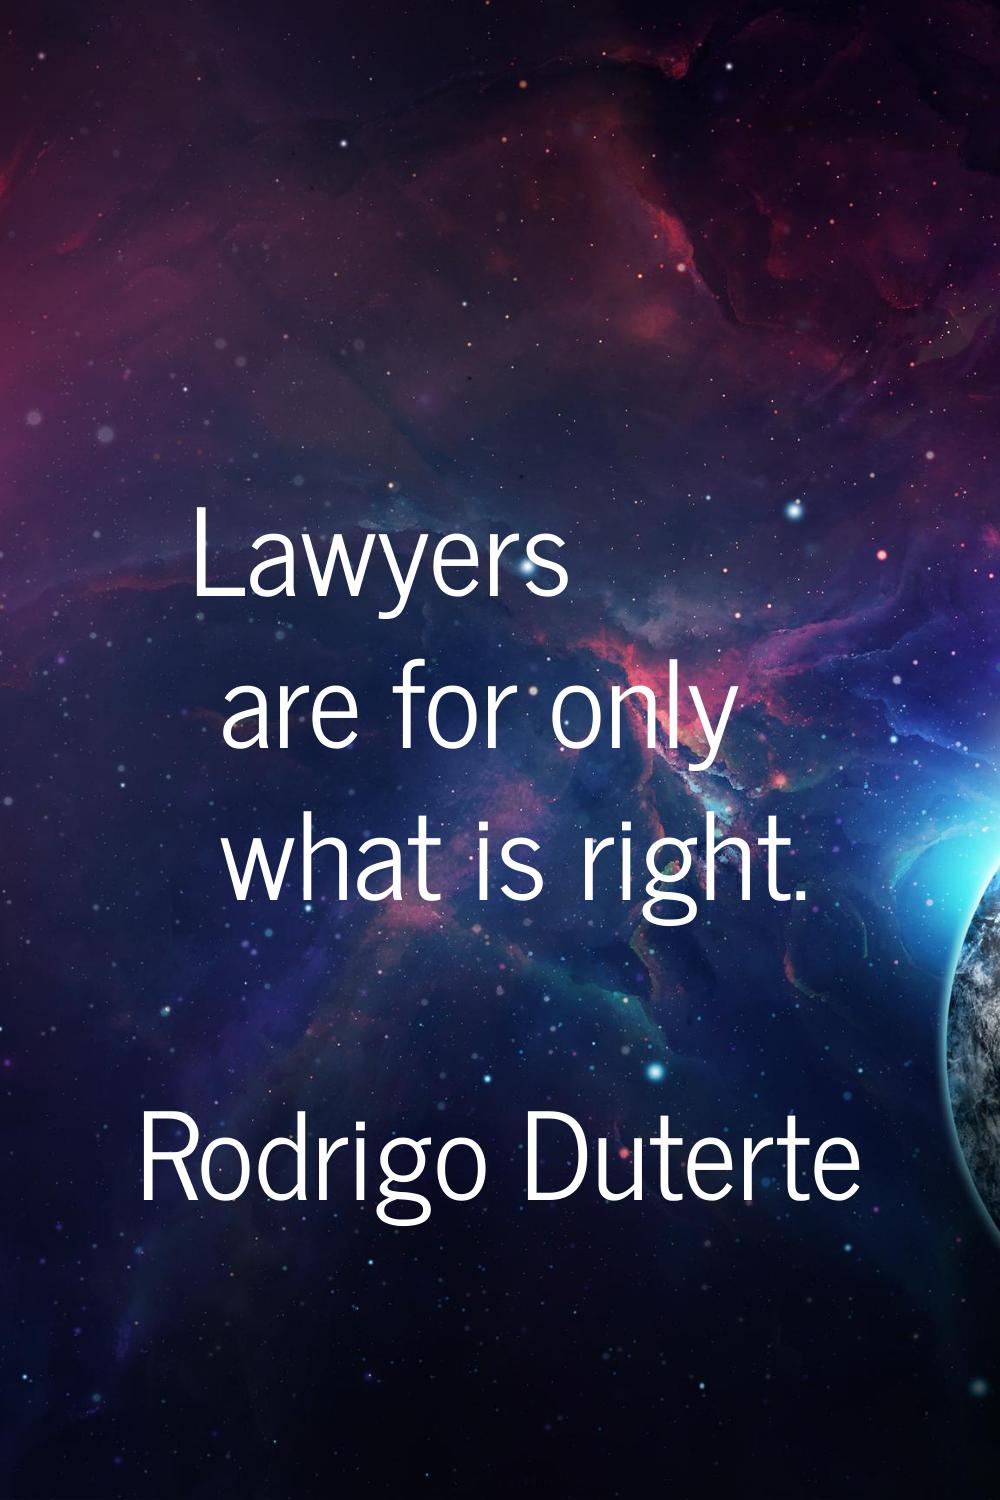 Lawyers are for only what is right.